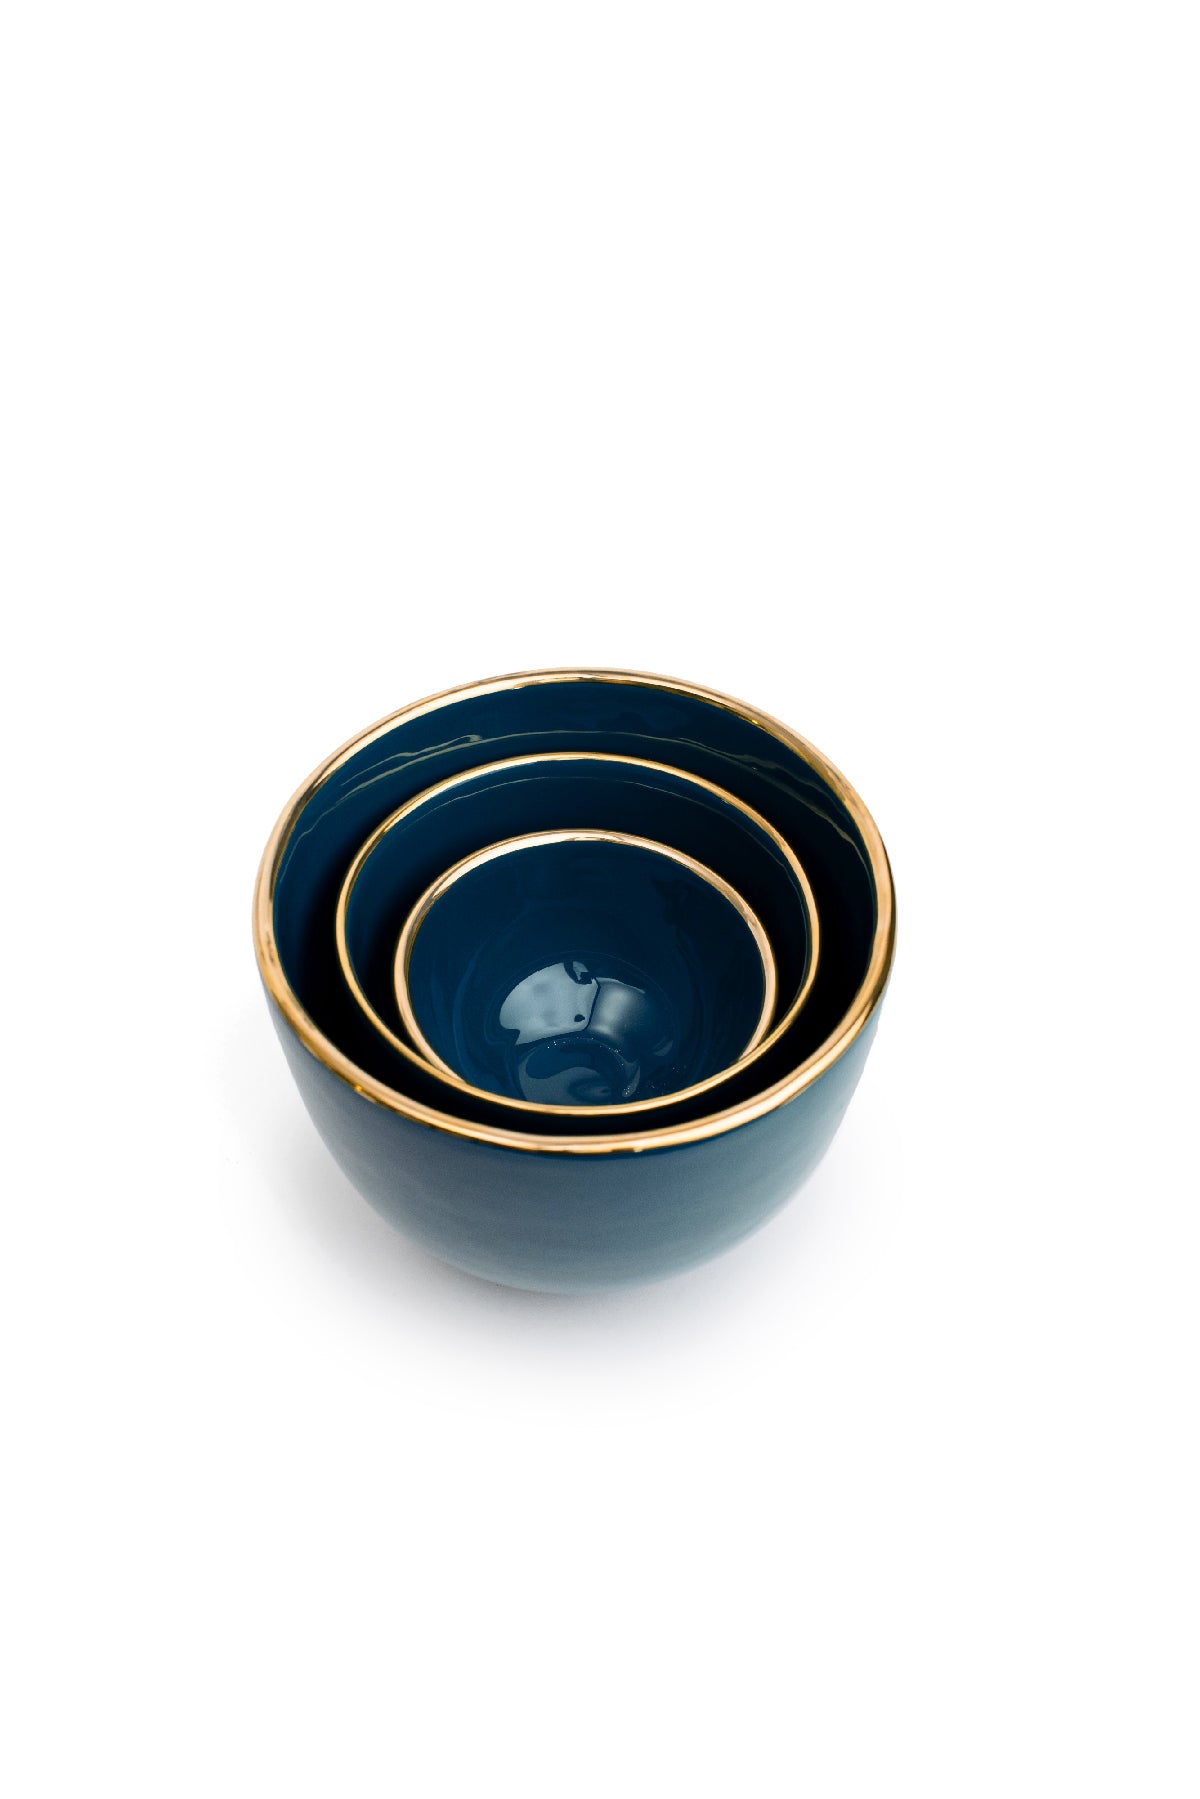 Minimalist Teal Bowl with Gold Edges